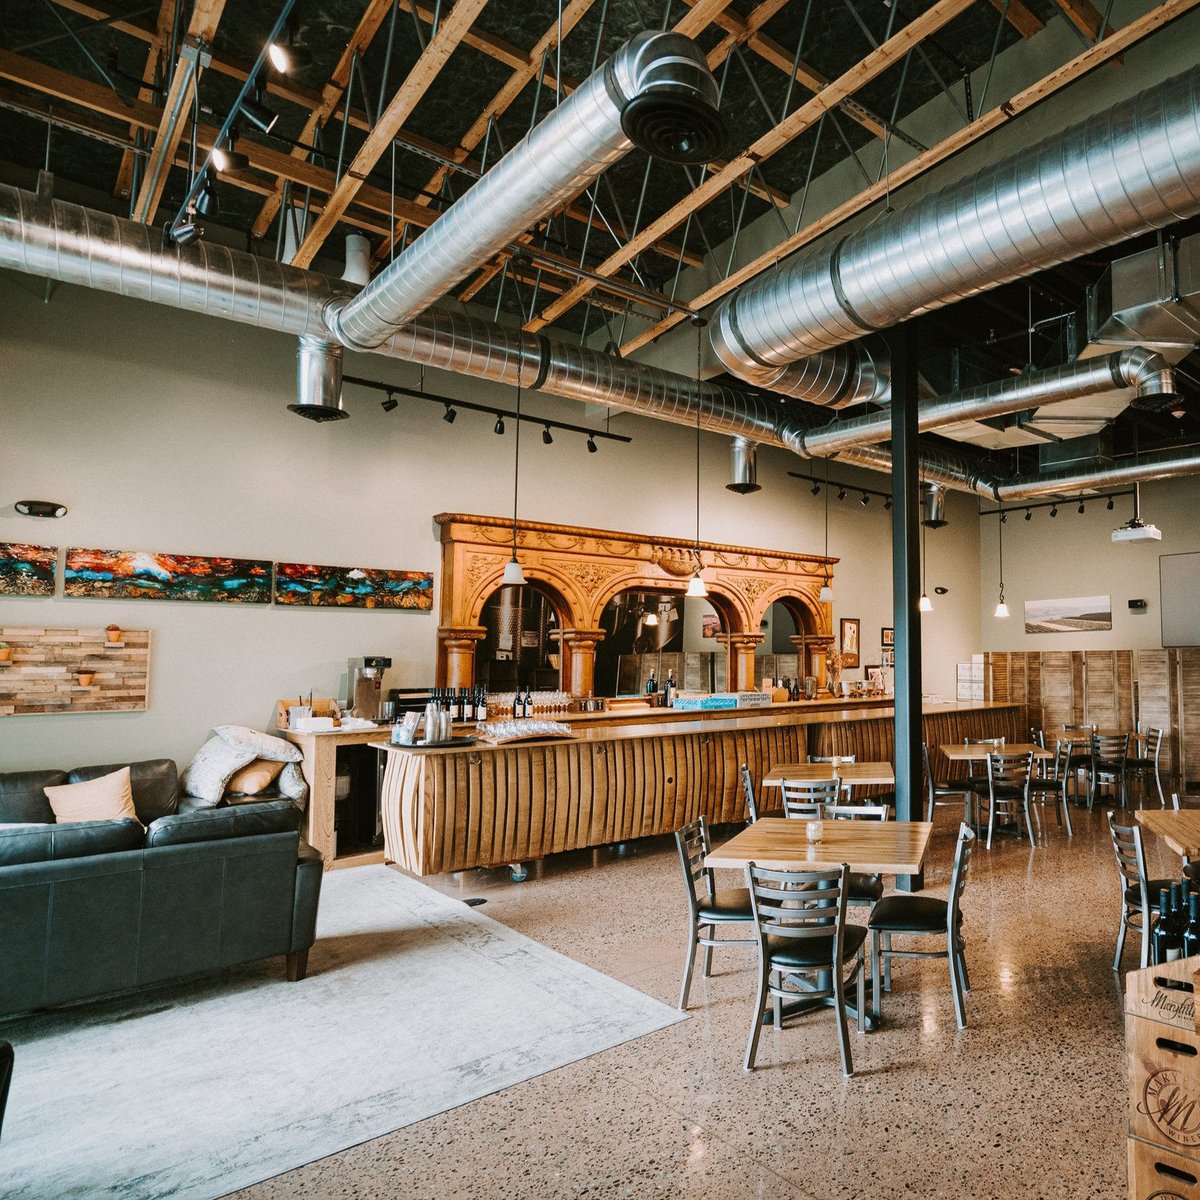 Find one of Maryhill Winery's 4 tasting rooms at the Kendall Yards in #Spokane. Maryhill's founders are both native to Spokane, so it was the obvious location to open their first satellite #tastingroom in 2017.